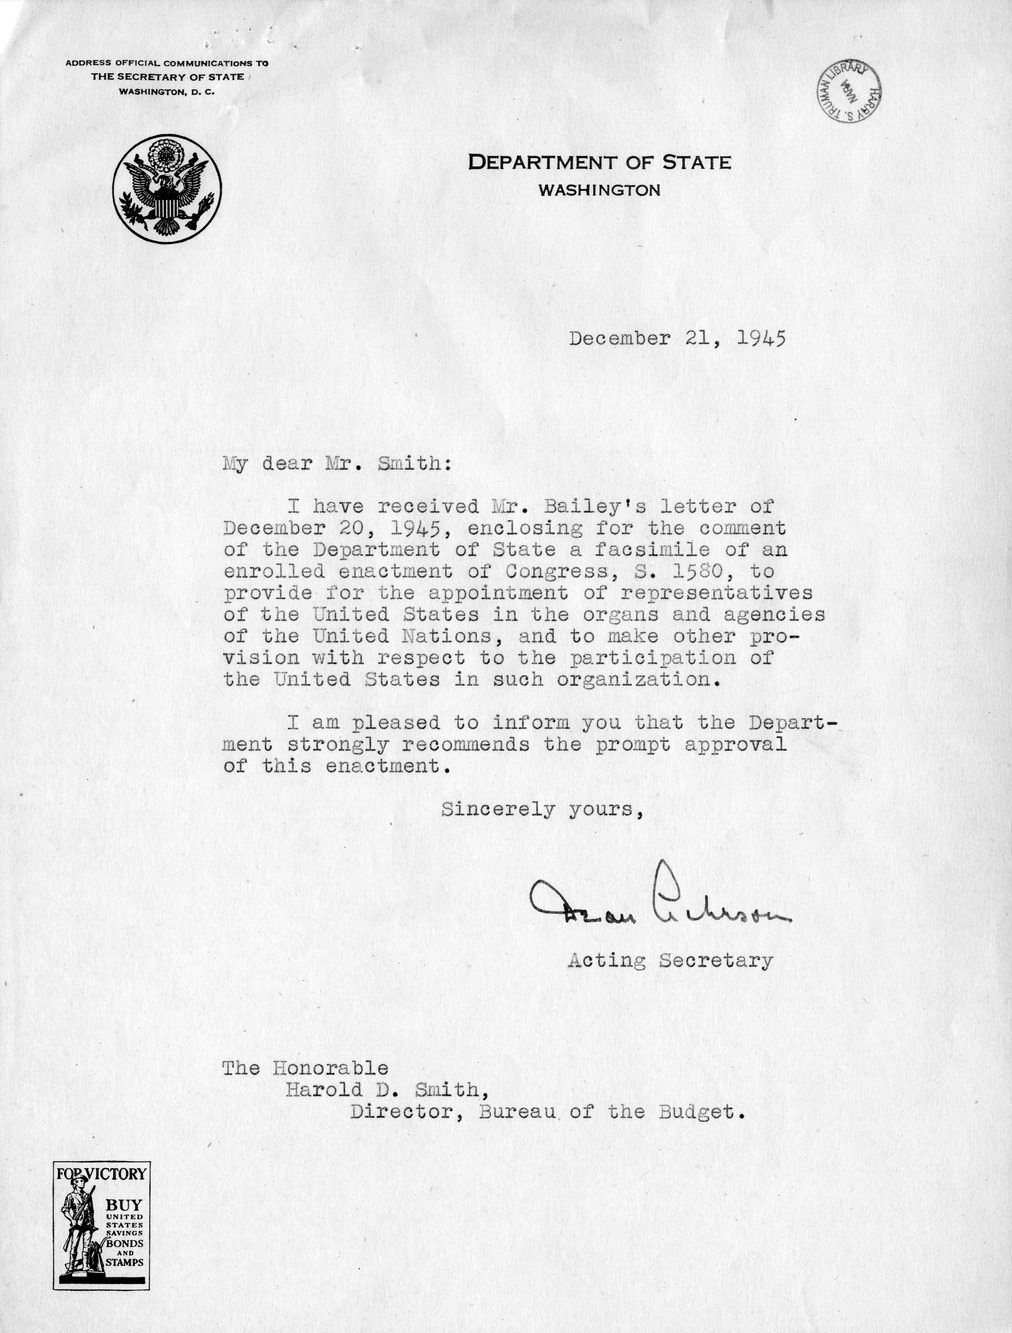 Memorandum from Harold D. Smith to M. C. Latta, S. 1580, To Provide for the Appointment of Representatives of the United States in the Organs and Agencies of the United Nations, and to Make Other Provision With Respect to the Participation of the United States in Such Organization, with Attachments